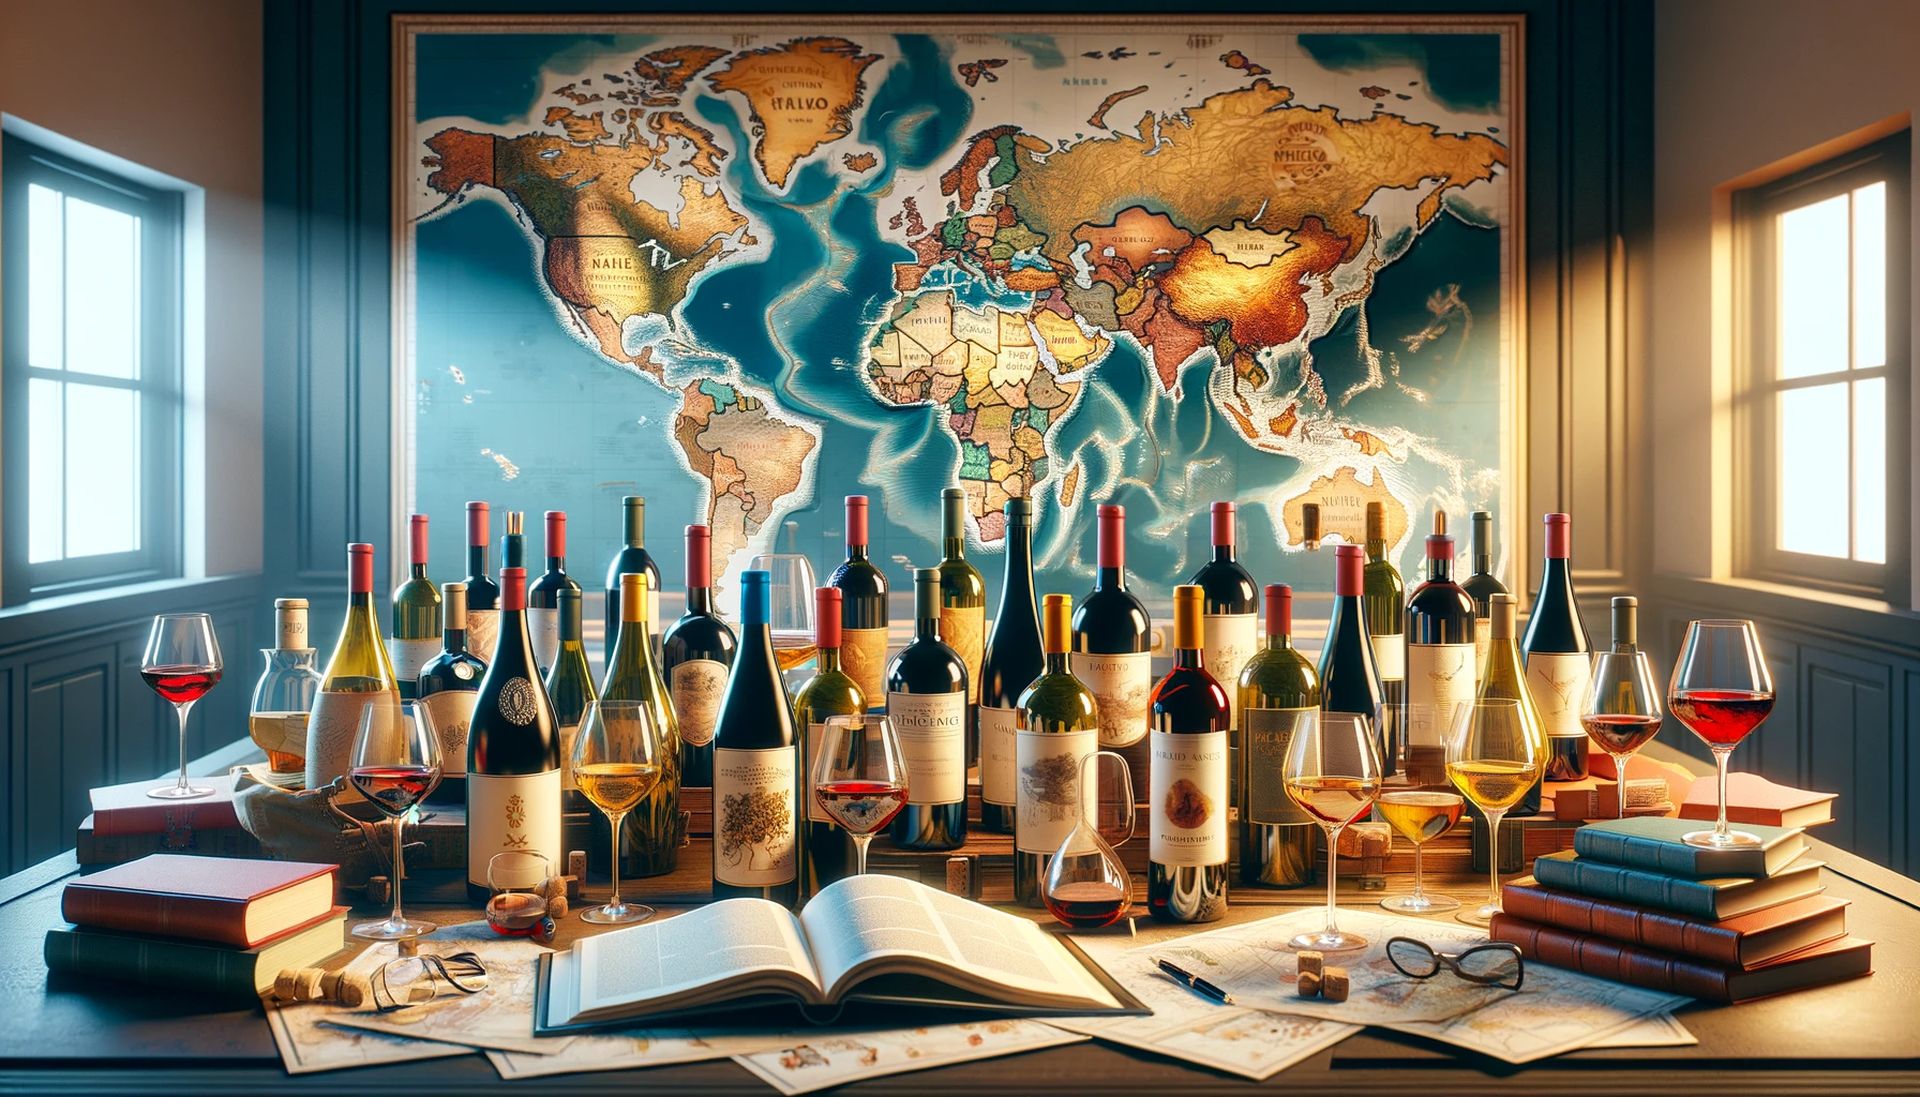 Learning About Wines - Encyclopedia Wines